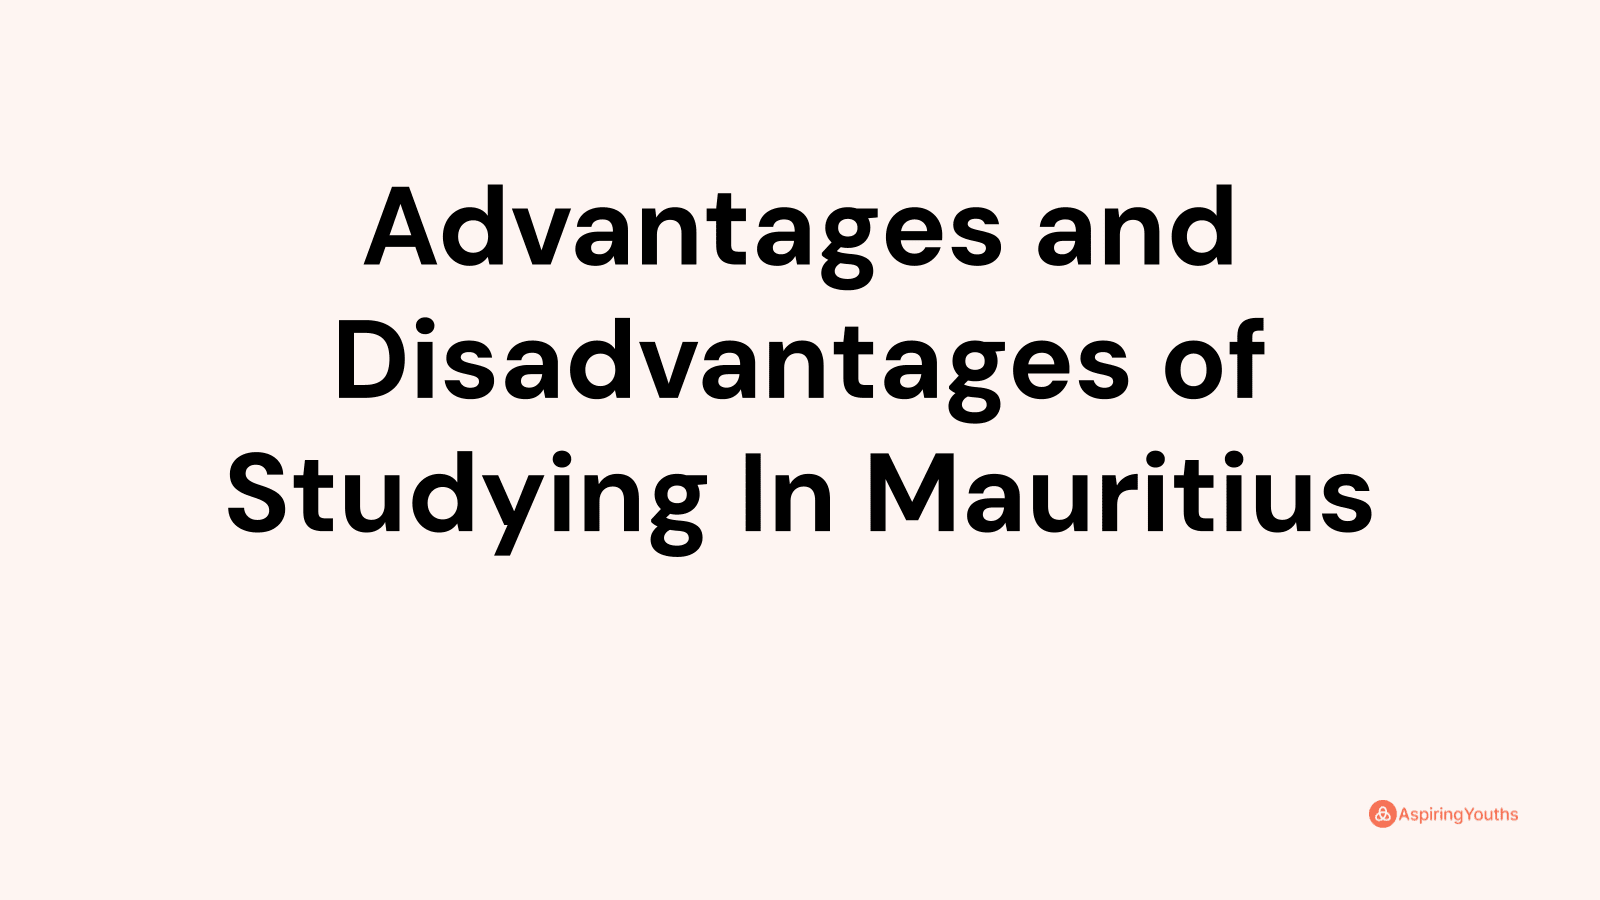 Advantages and disadvantages of Studying In Mauritius